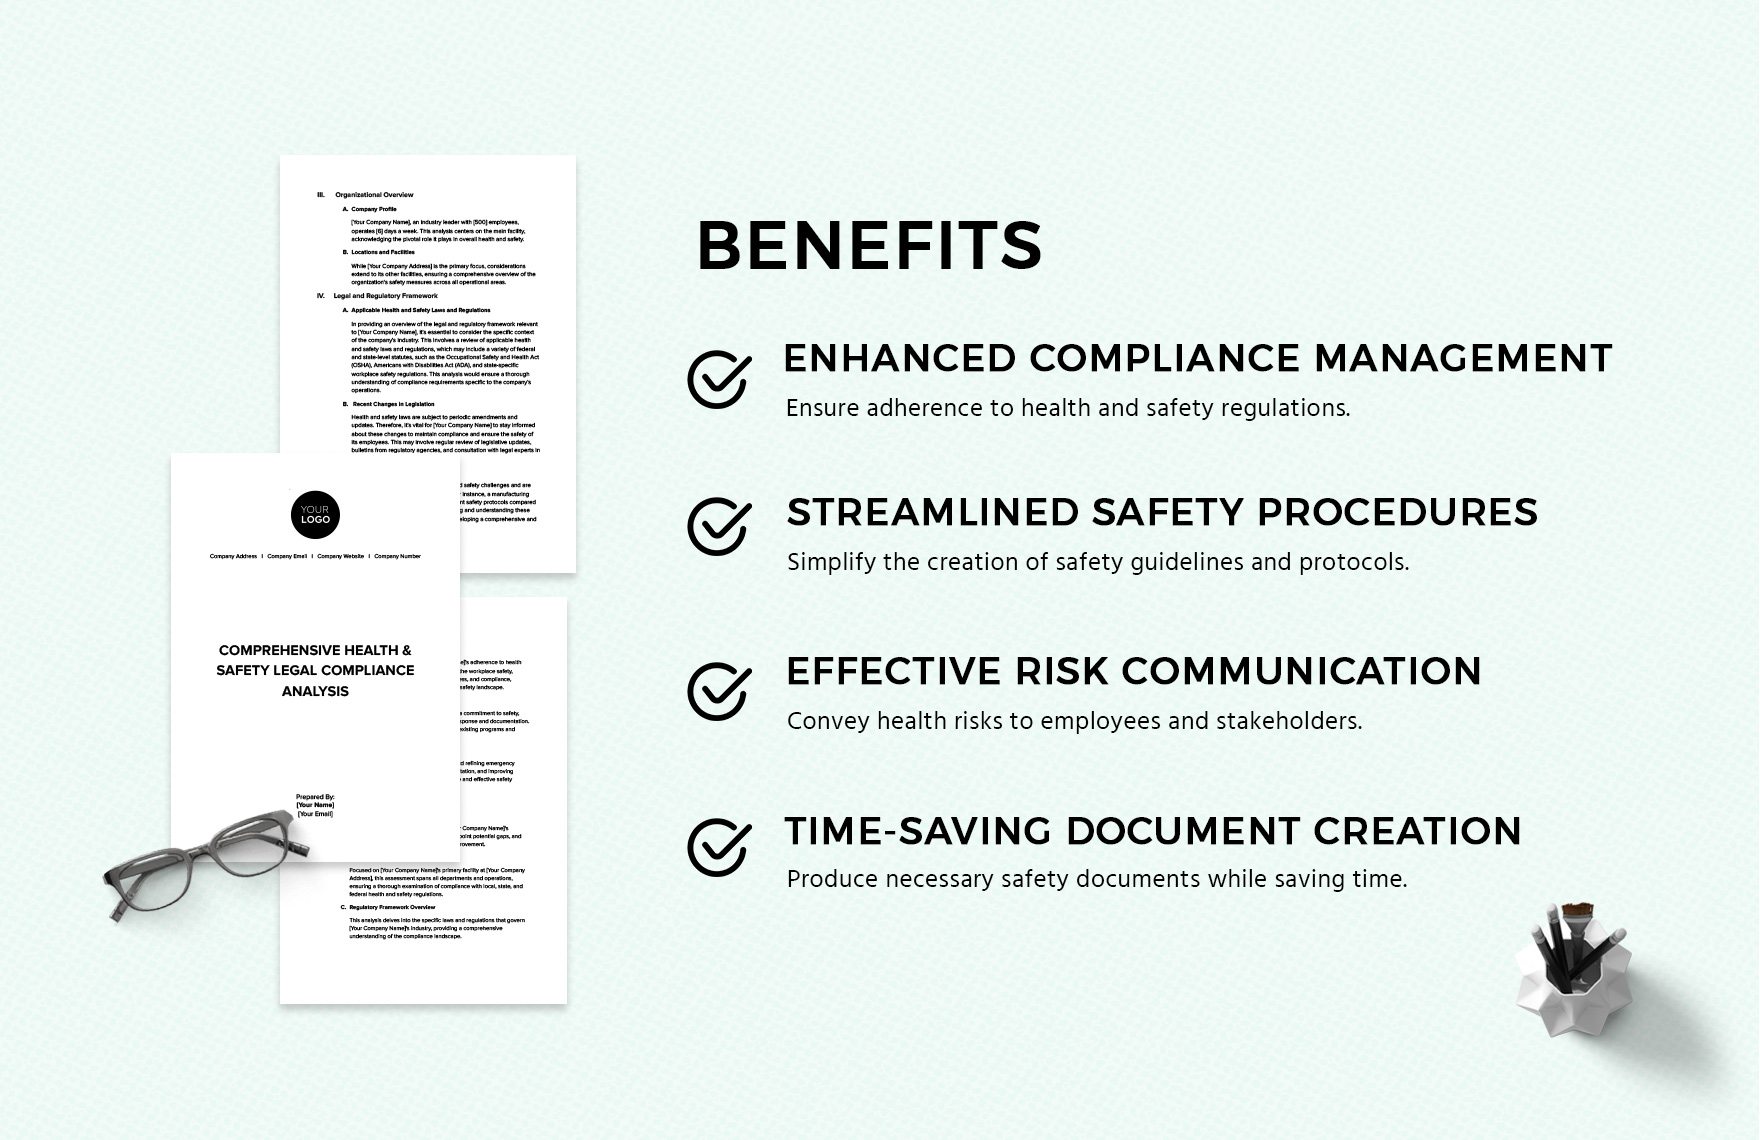 Comprehensive Health & Safety Legal Compliance Analysis Template